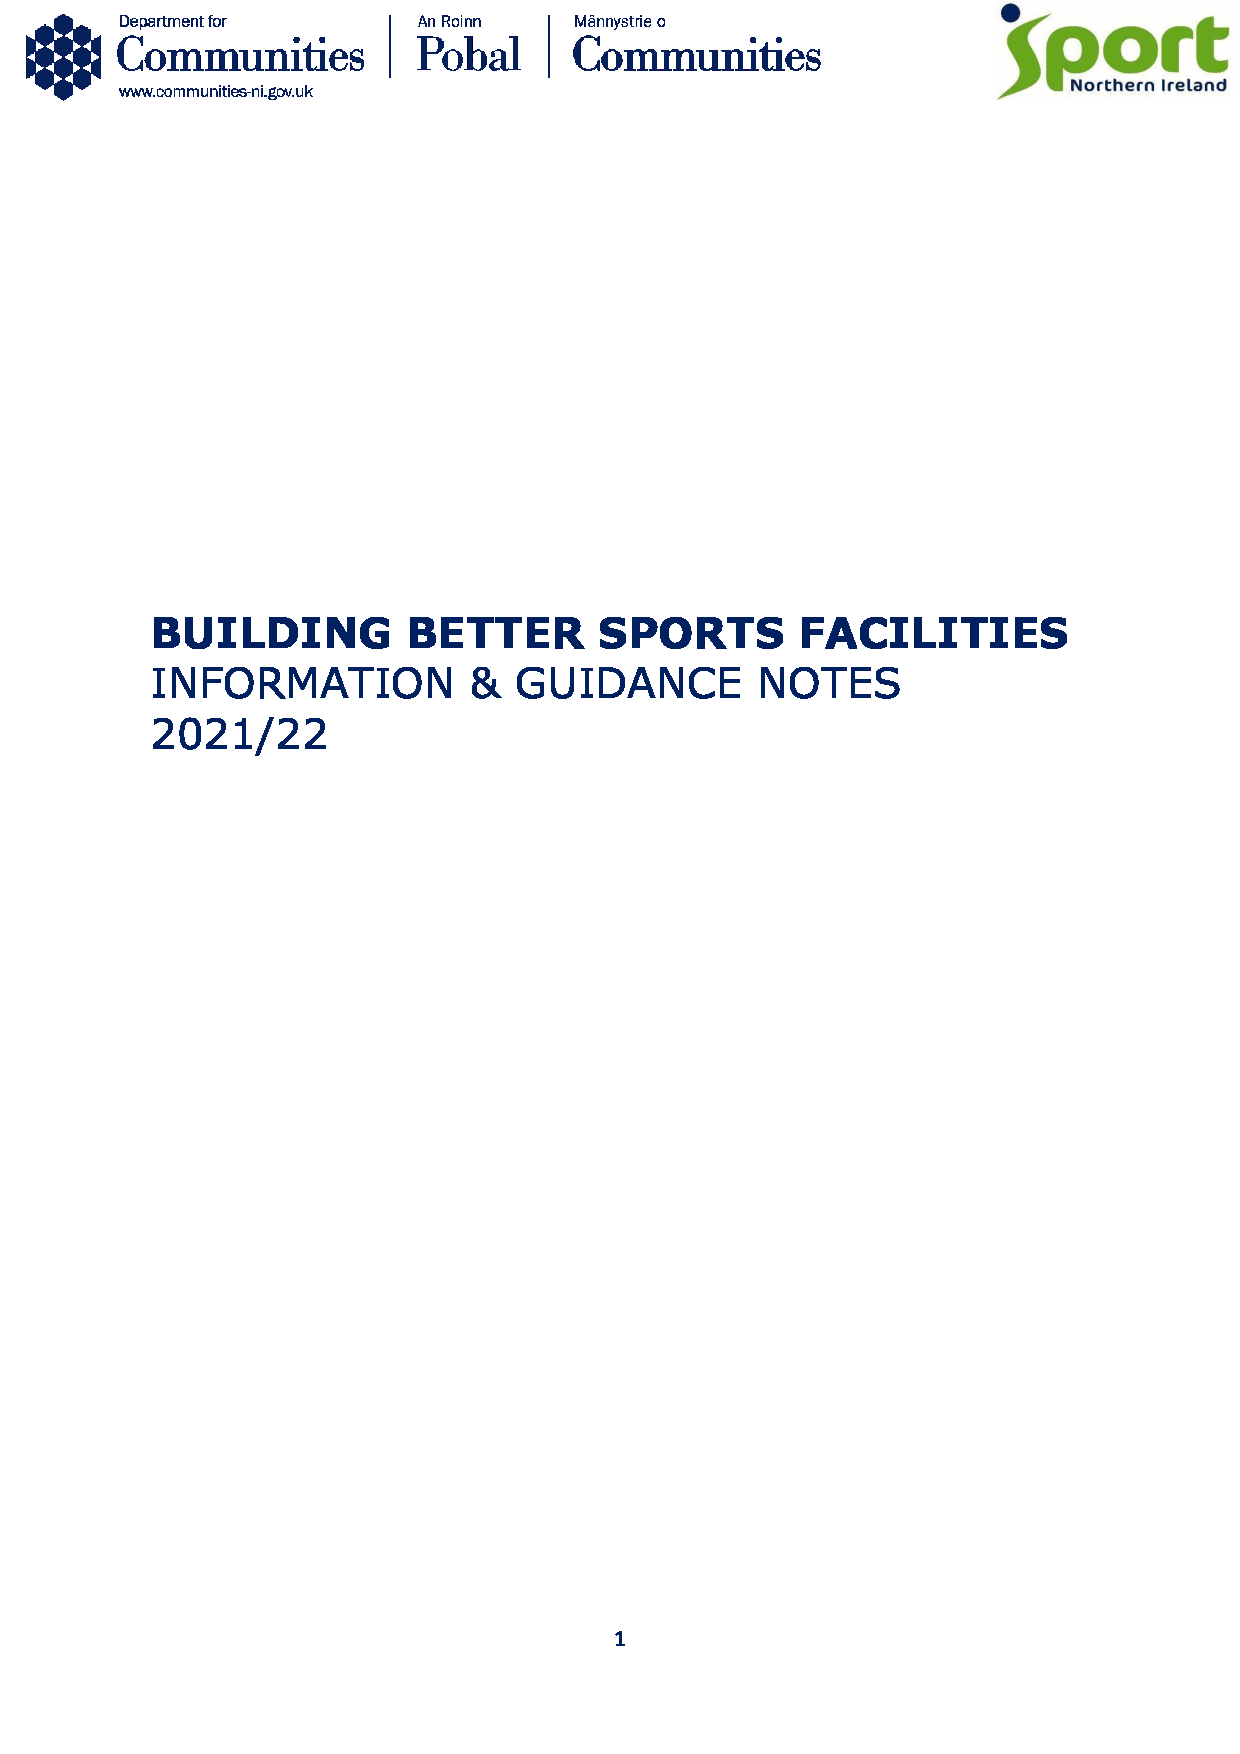 Building Better Sports Facilities - Information and Guidance Notes 2021-22_01